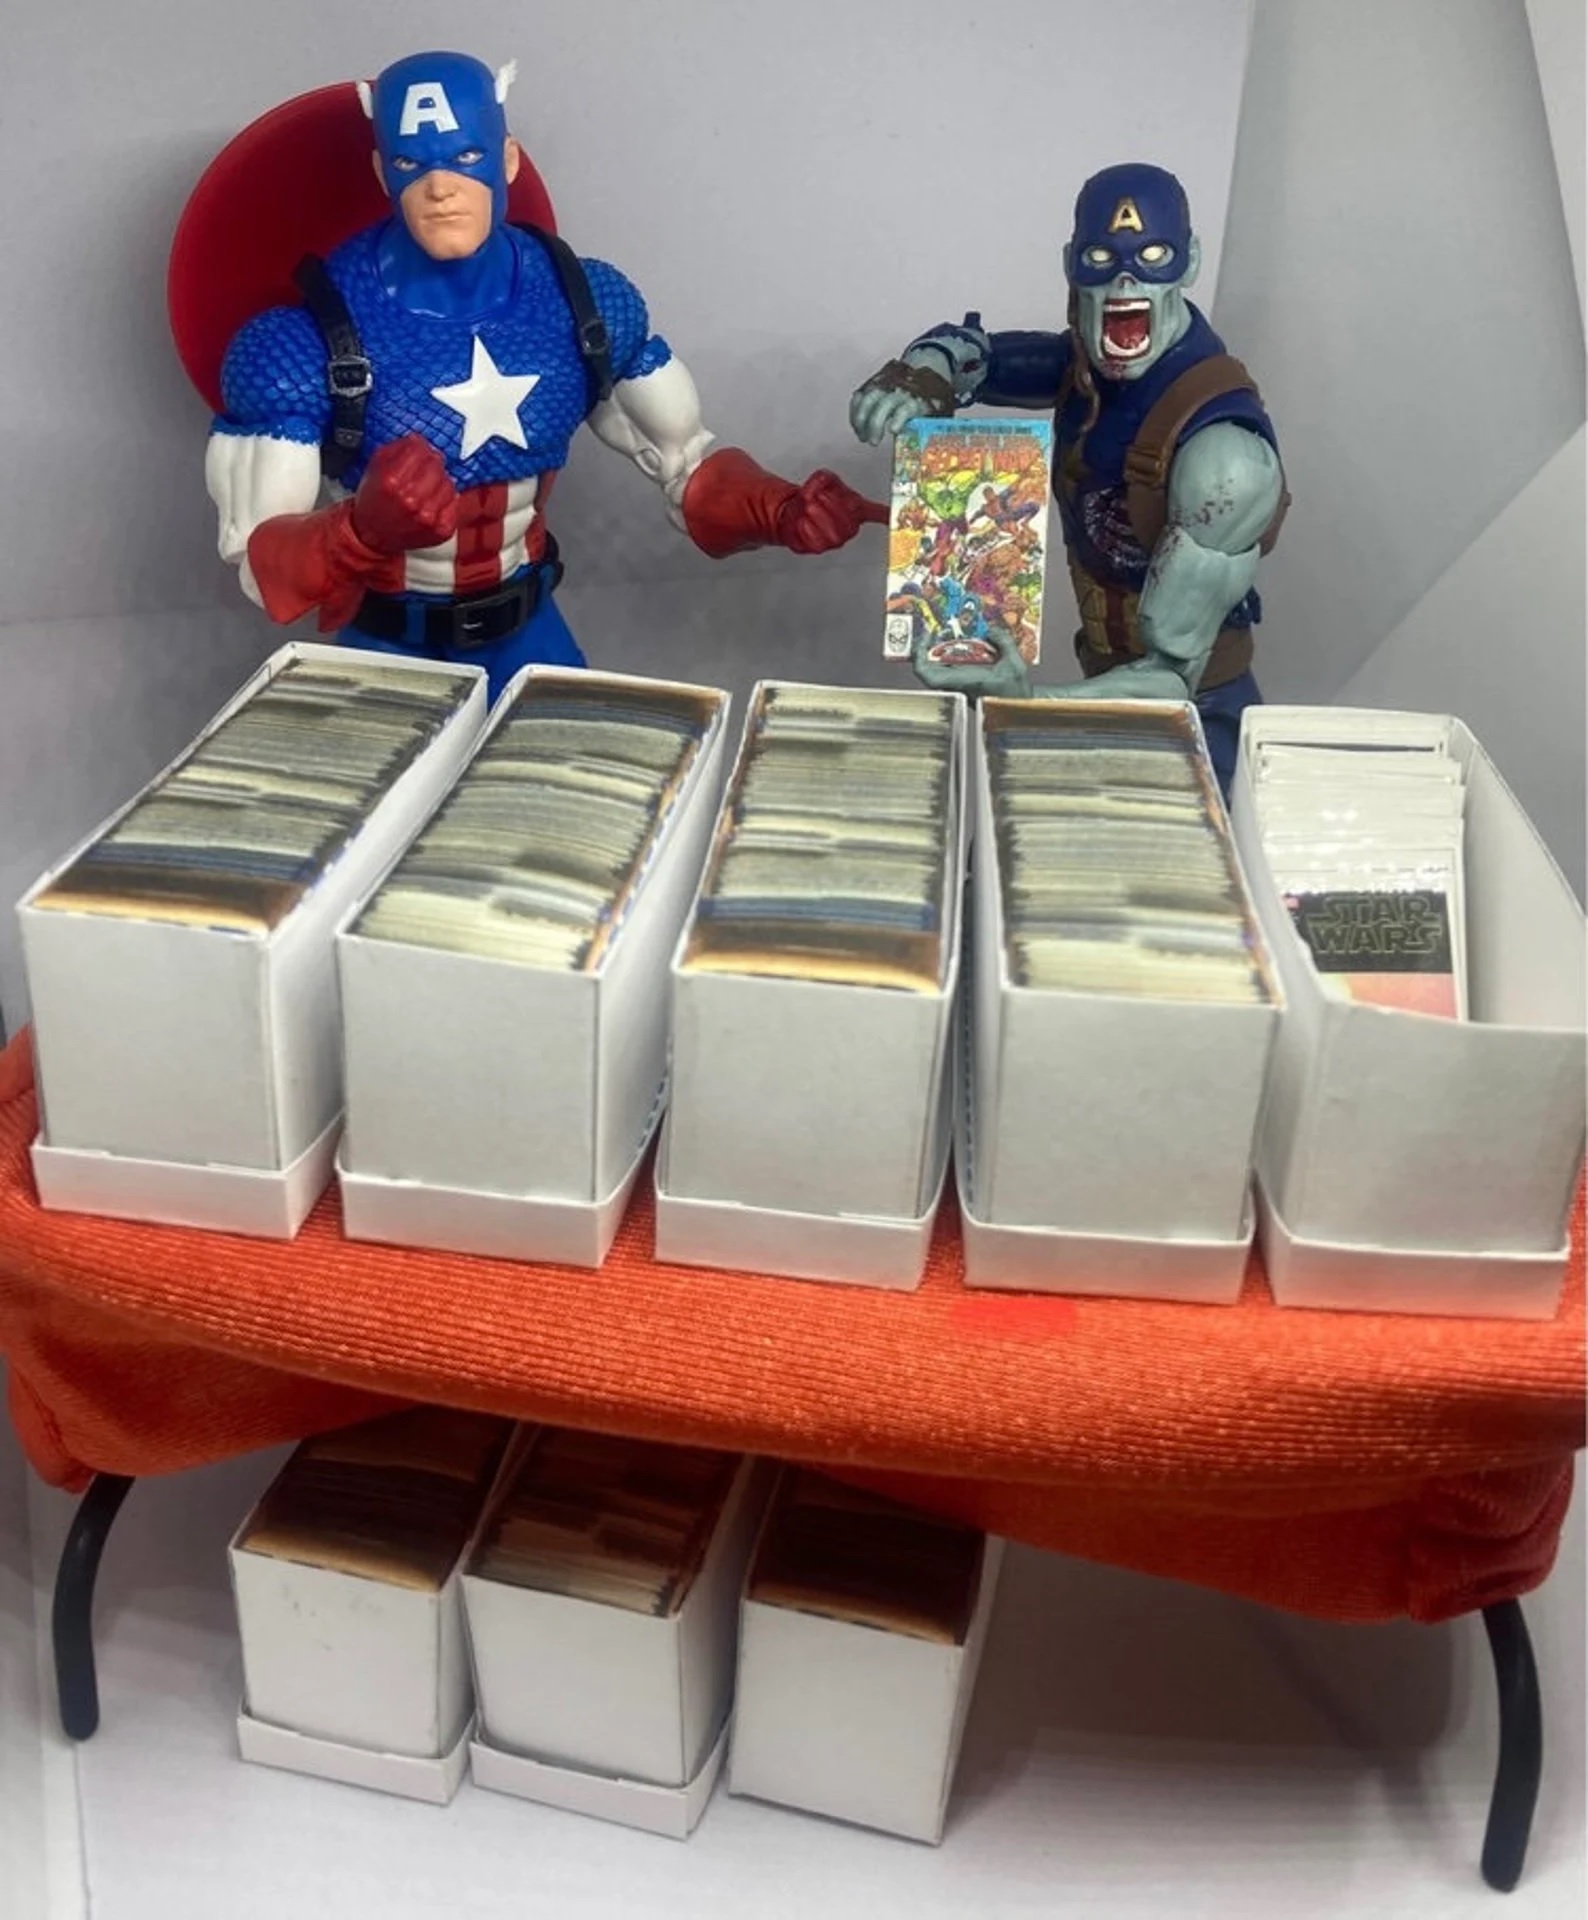 Two action figures of Captain America show off doll-sized comics lined up in doll-sized longboxes